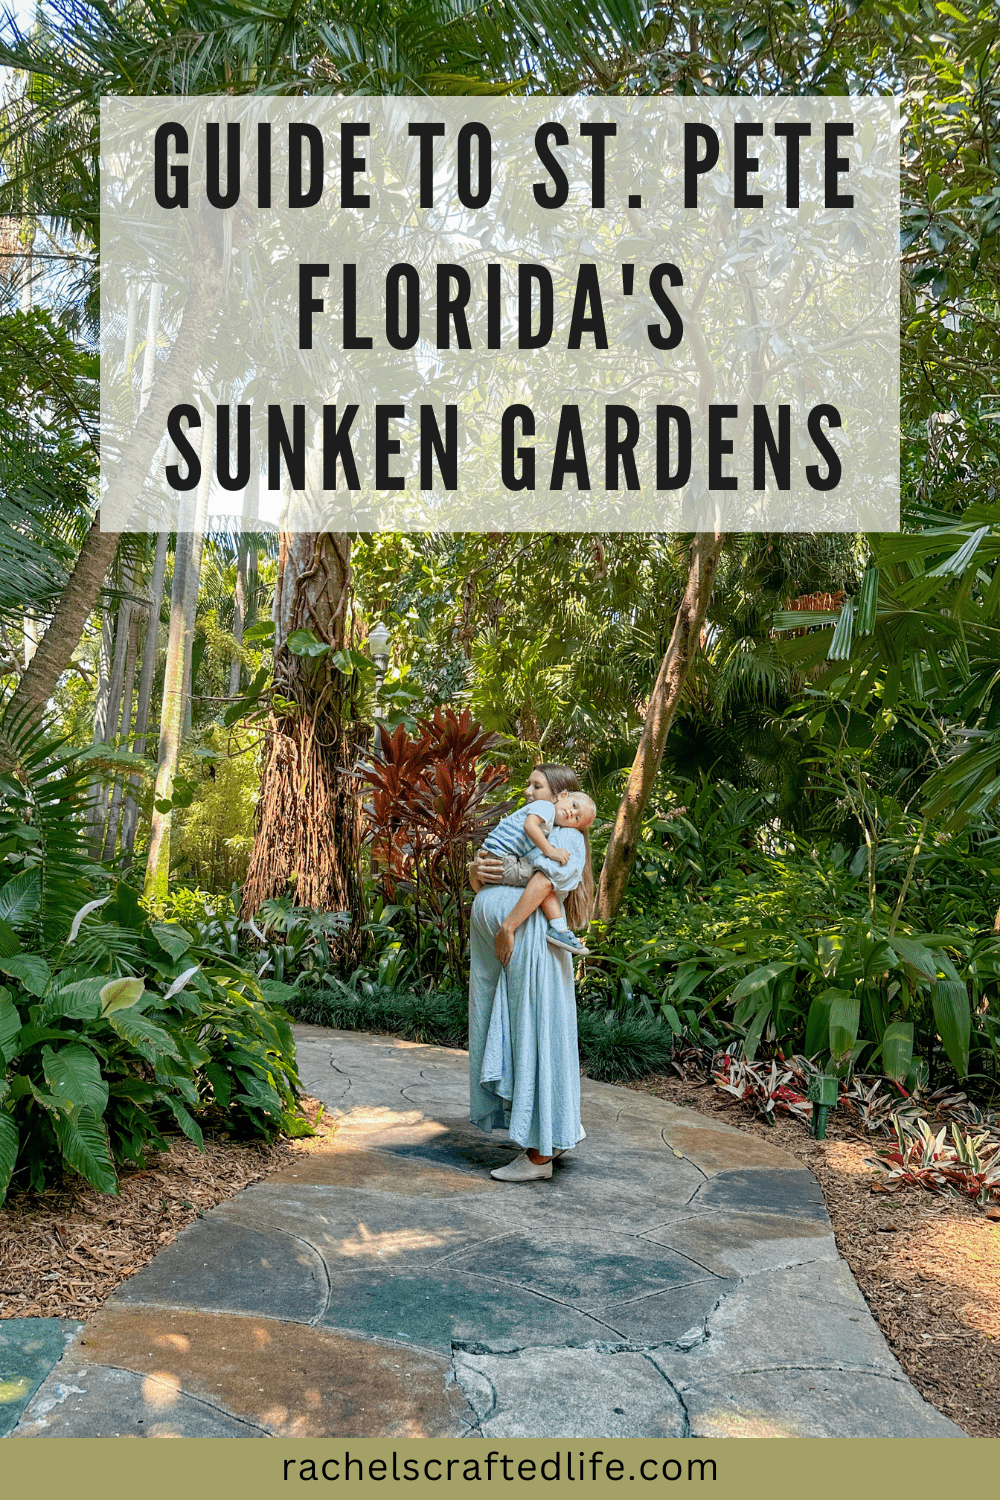 You are currently viewing Guide to St. Petersburg, Florida’s Sunken Gardens